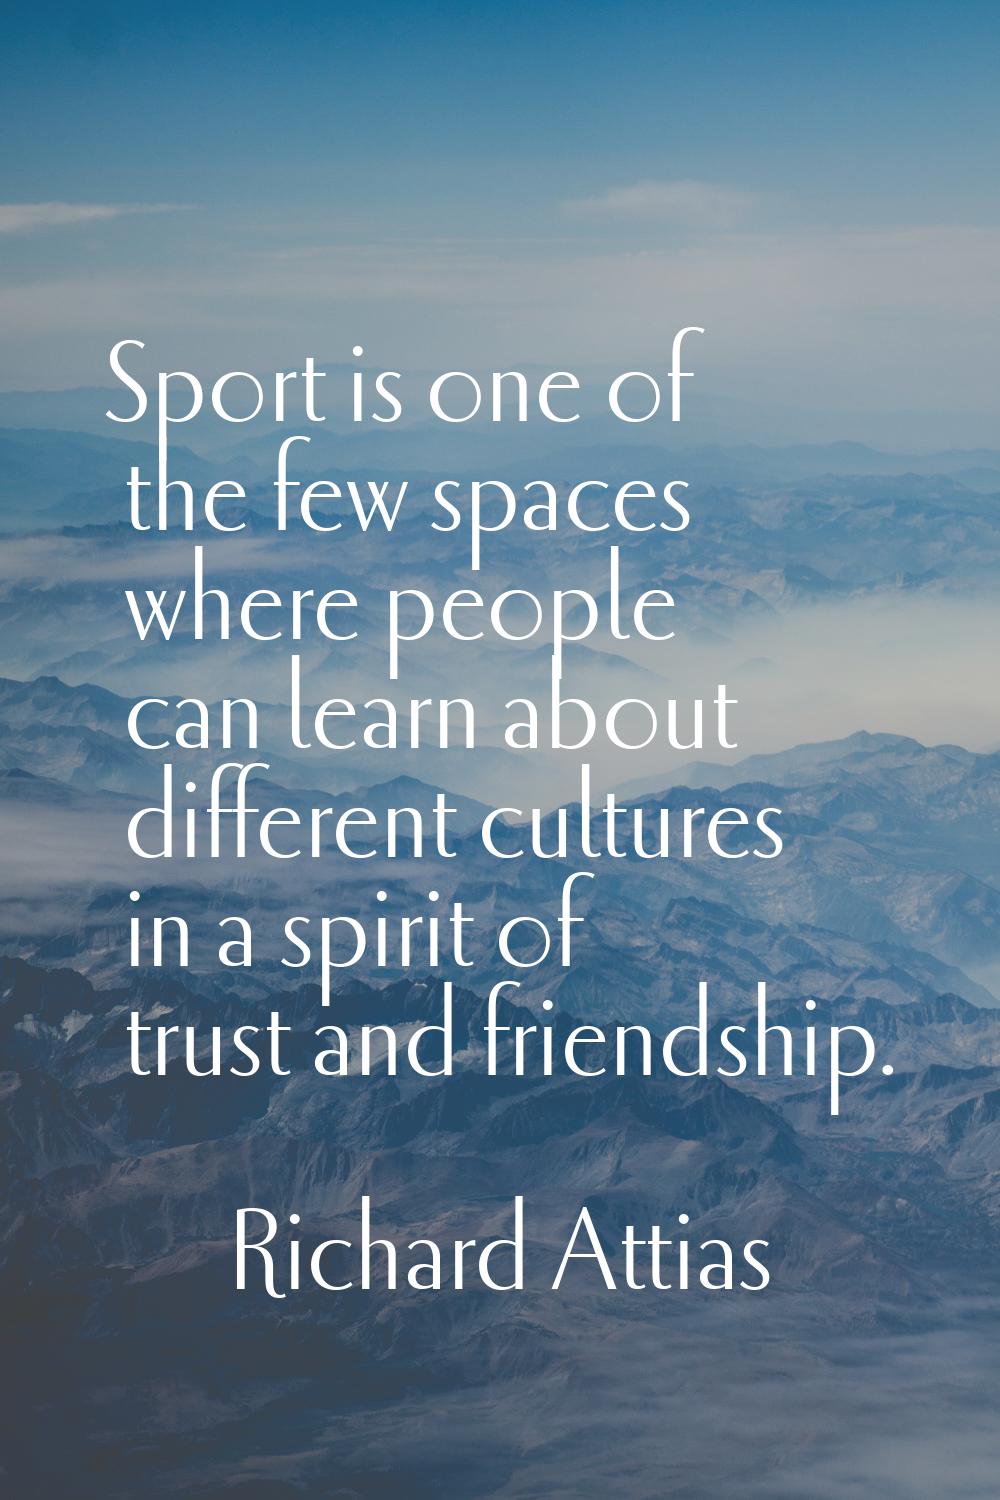 Sport is one of the few spaces where people can learn about different cultures in a spirit of trust